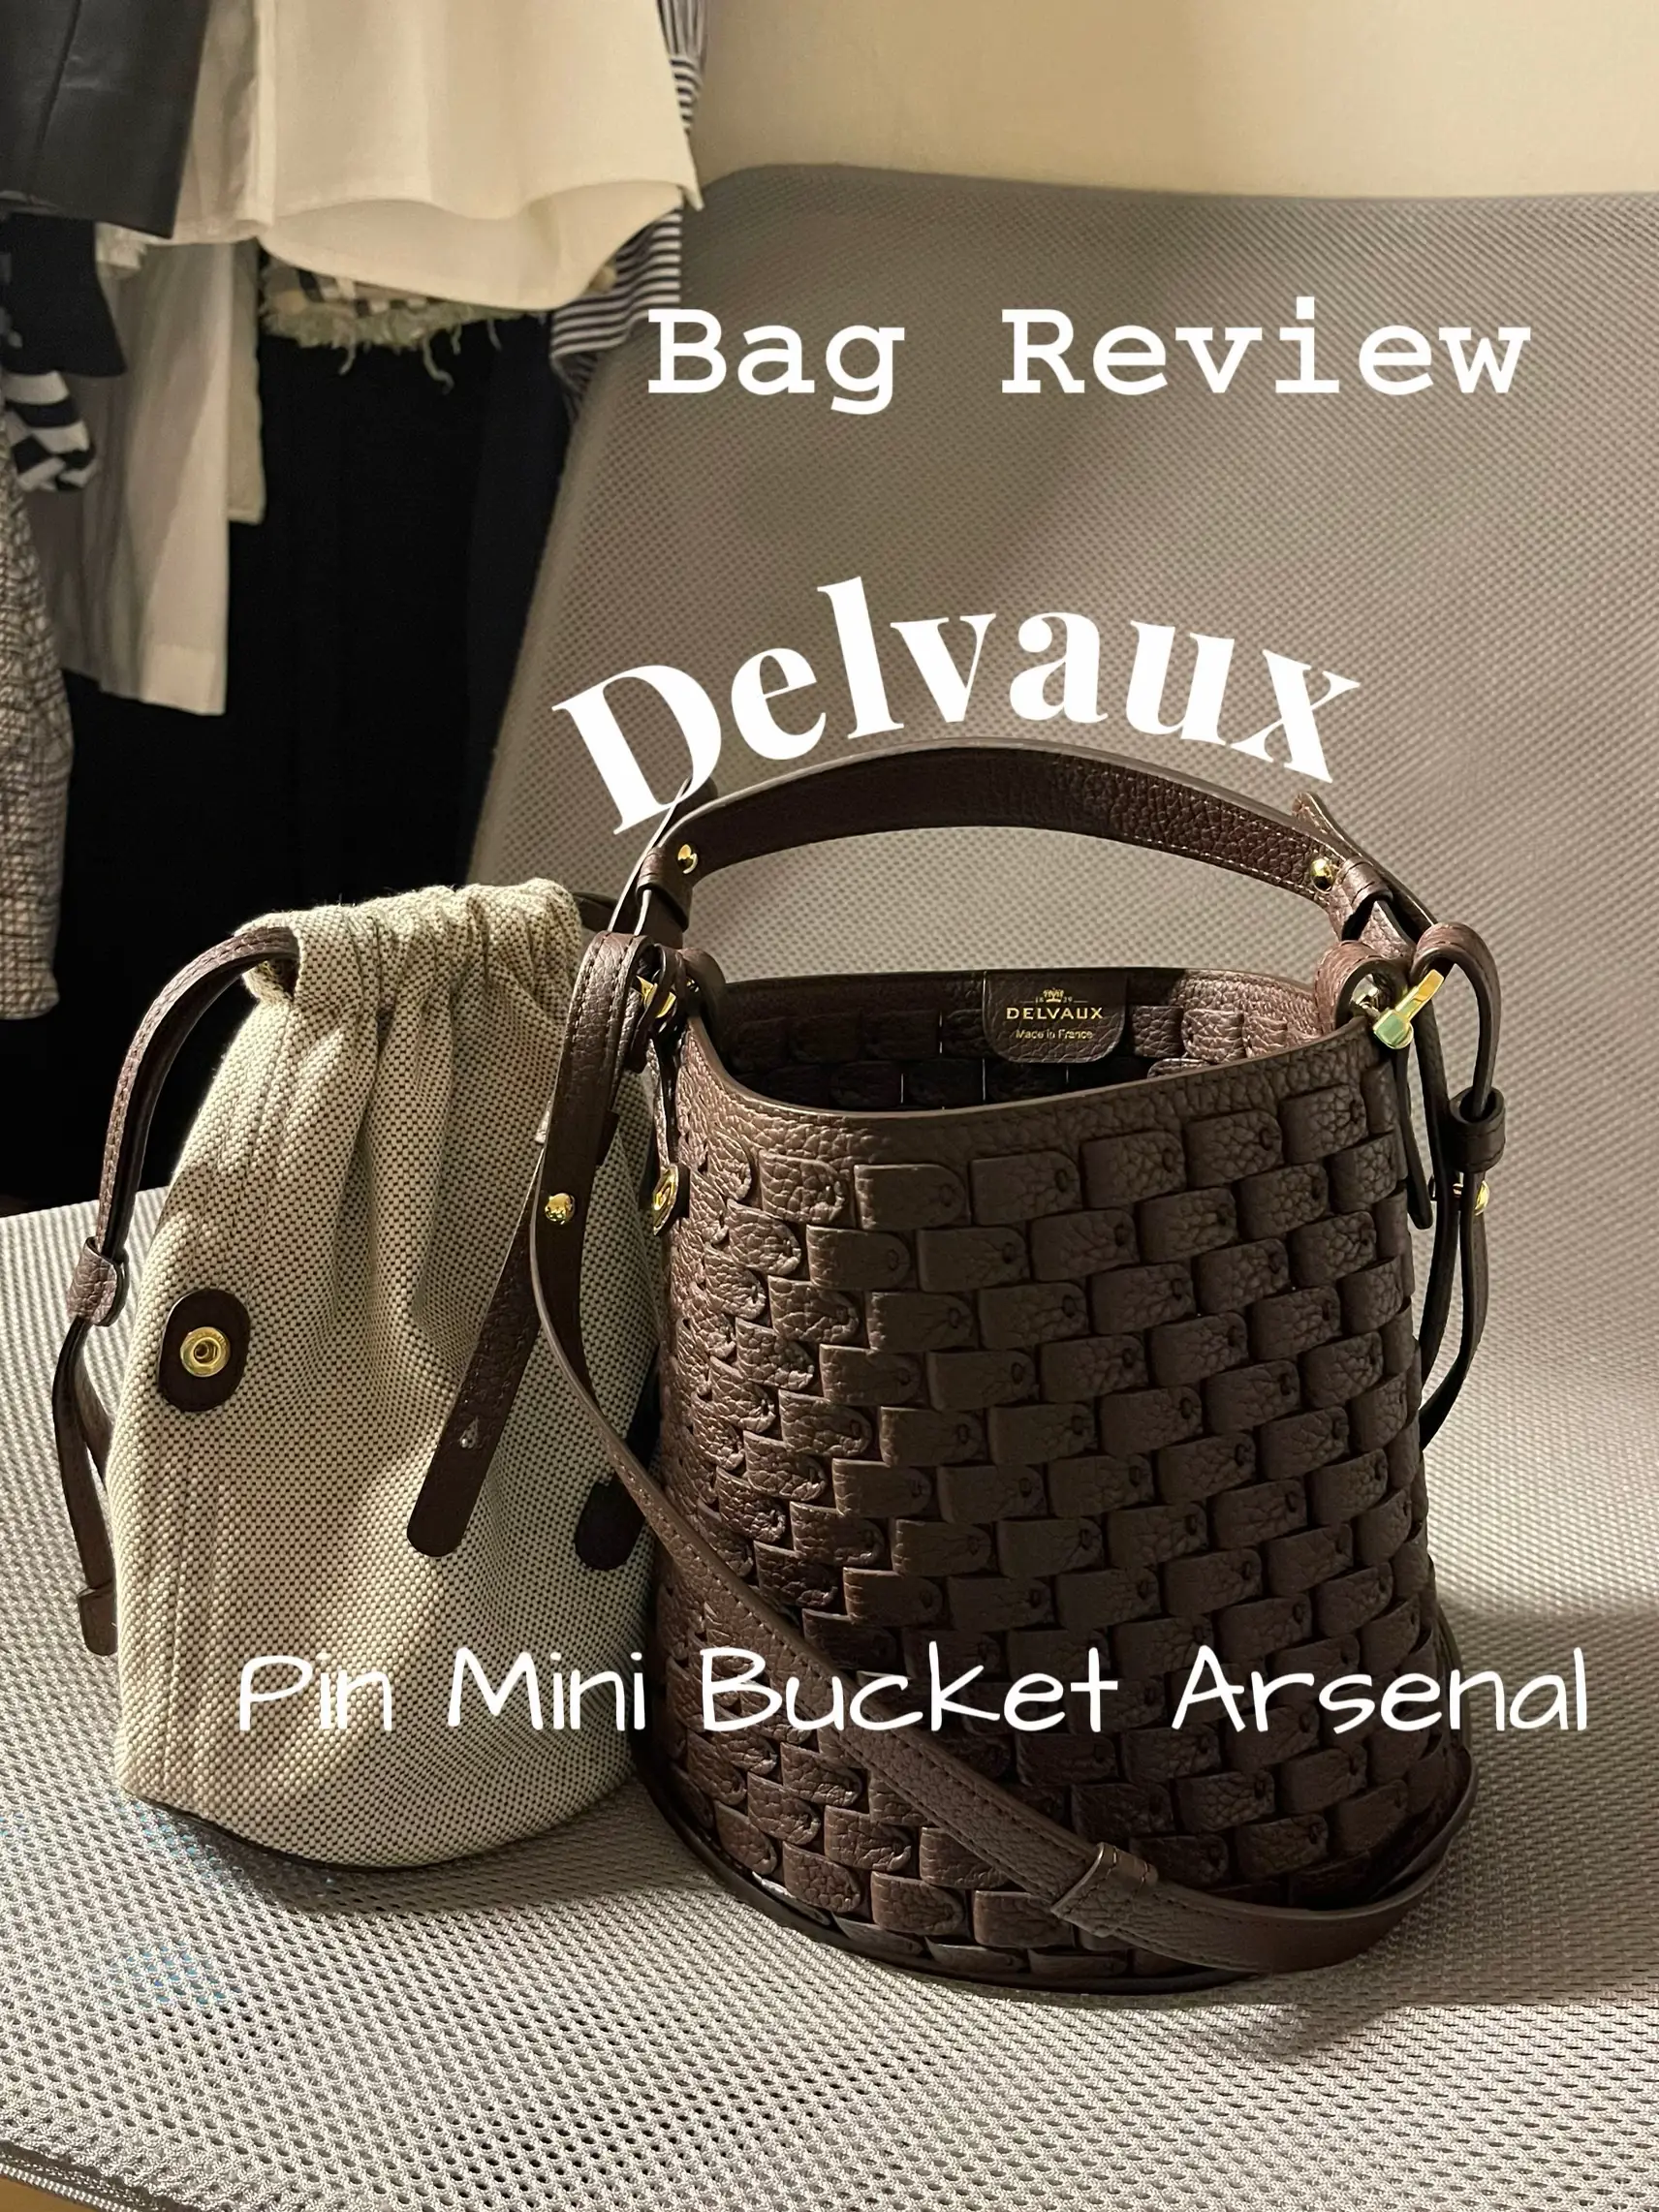 Delvaux Bag Review!! | Gallery posted by Isabelle | Lemon8